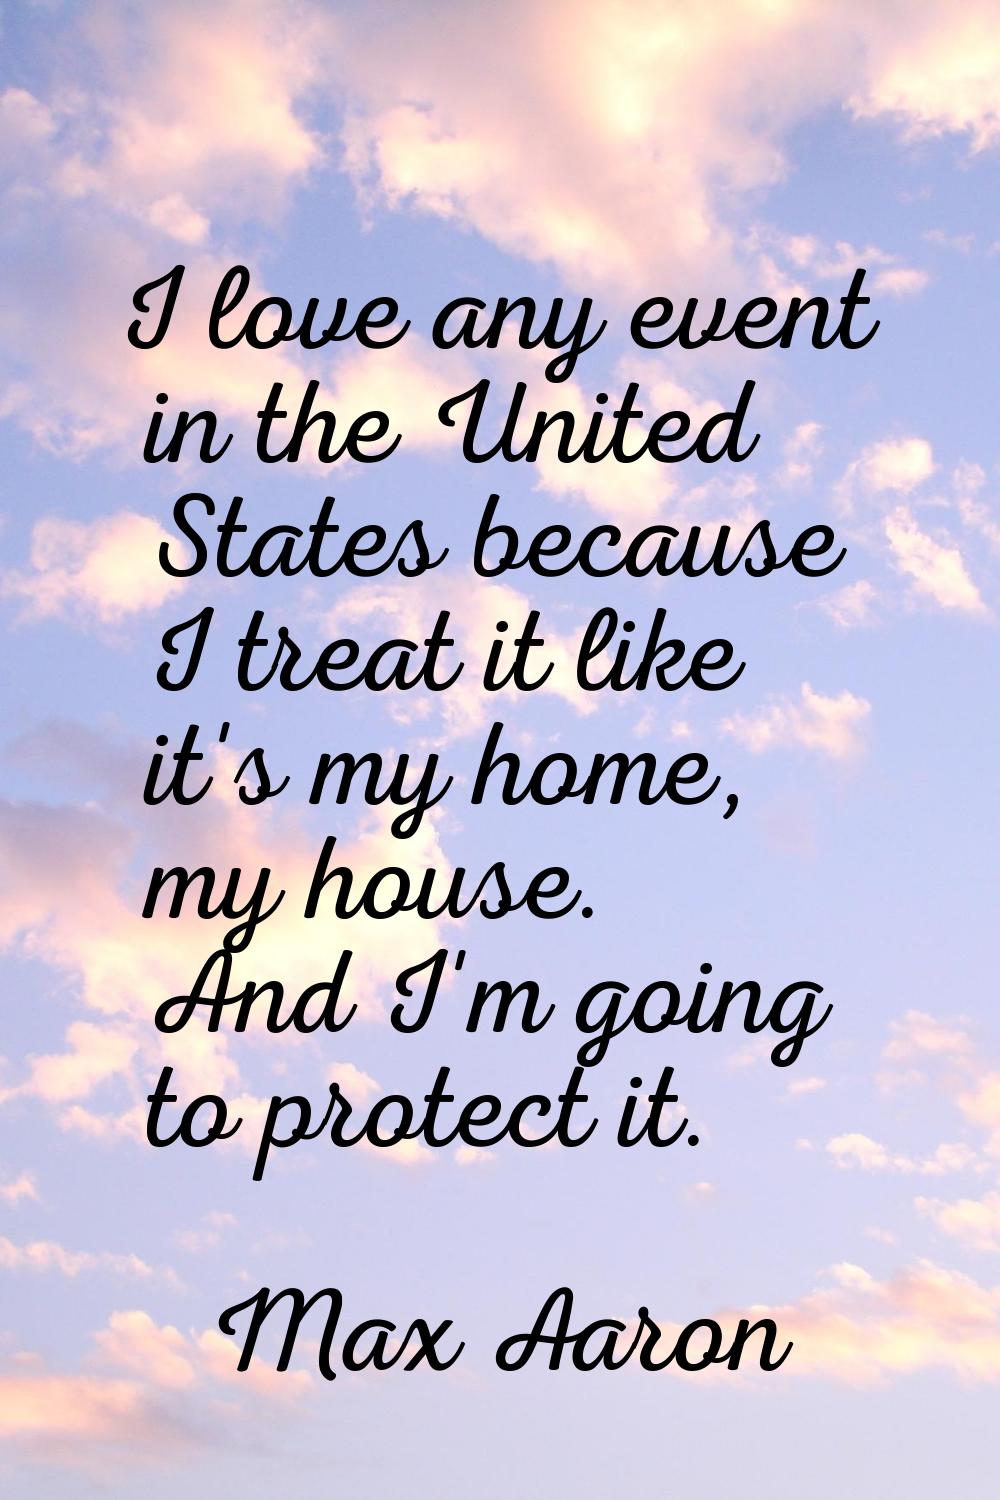 I love any event in the United States because I treat it like it's my home, my house. And I'm going